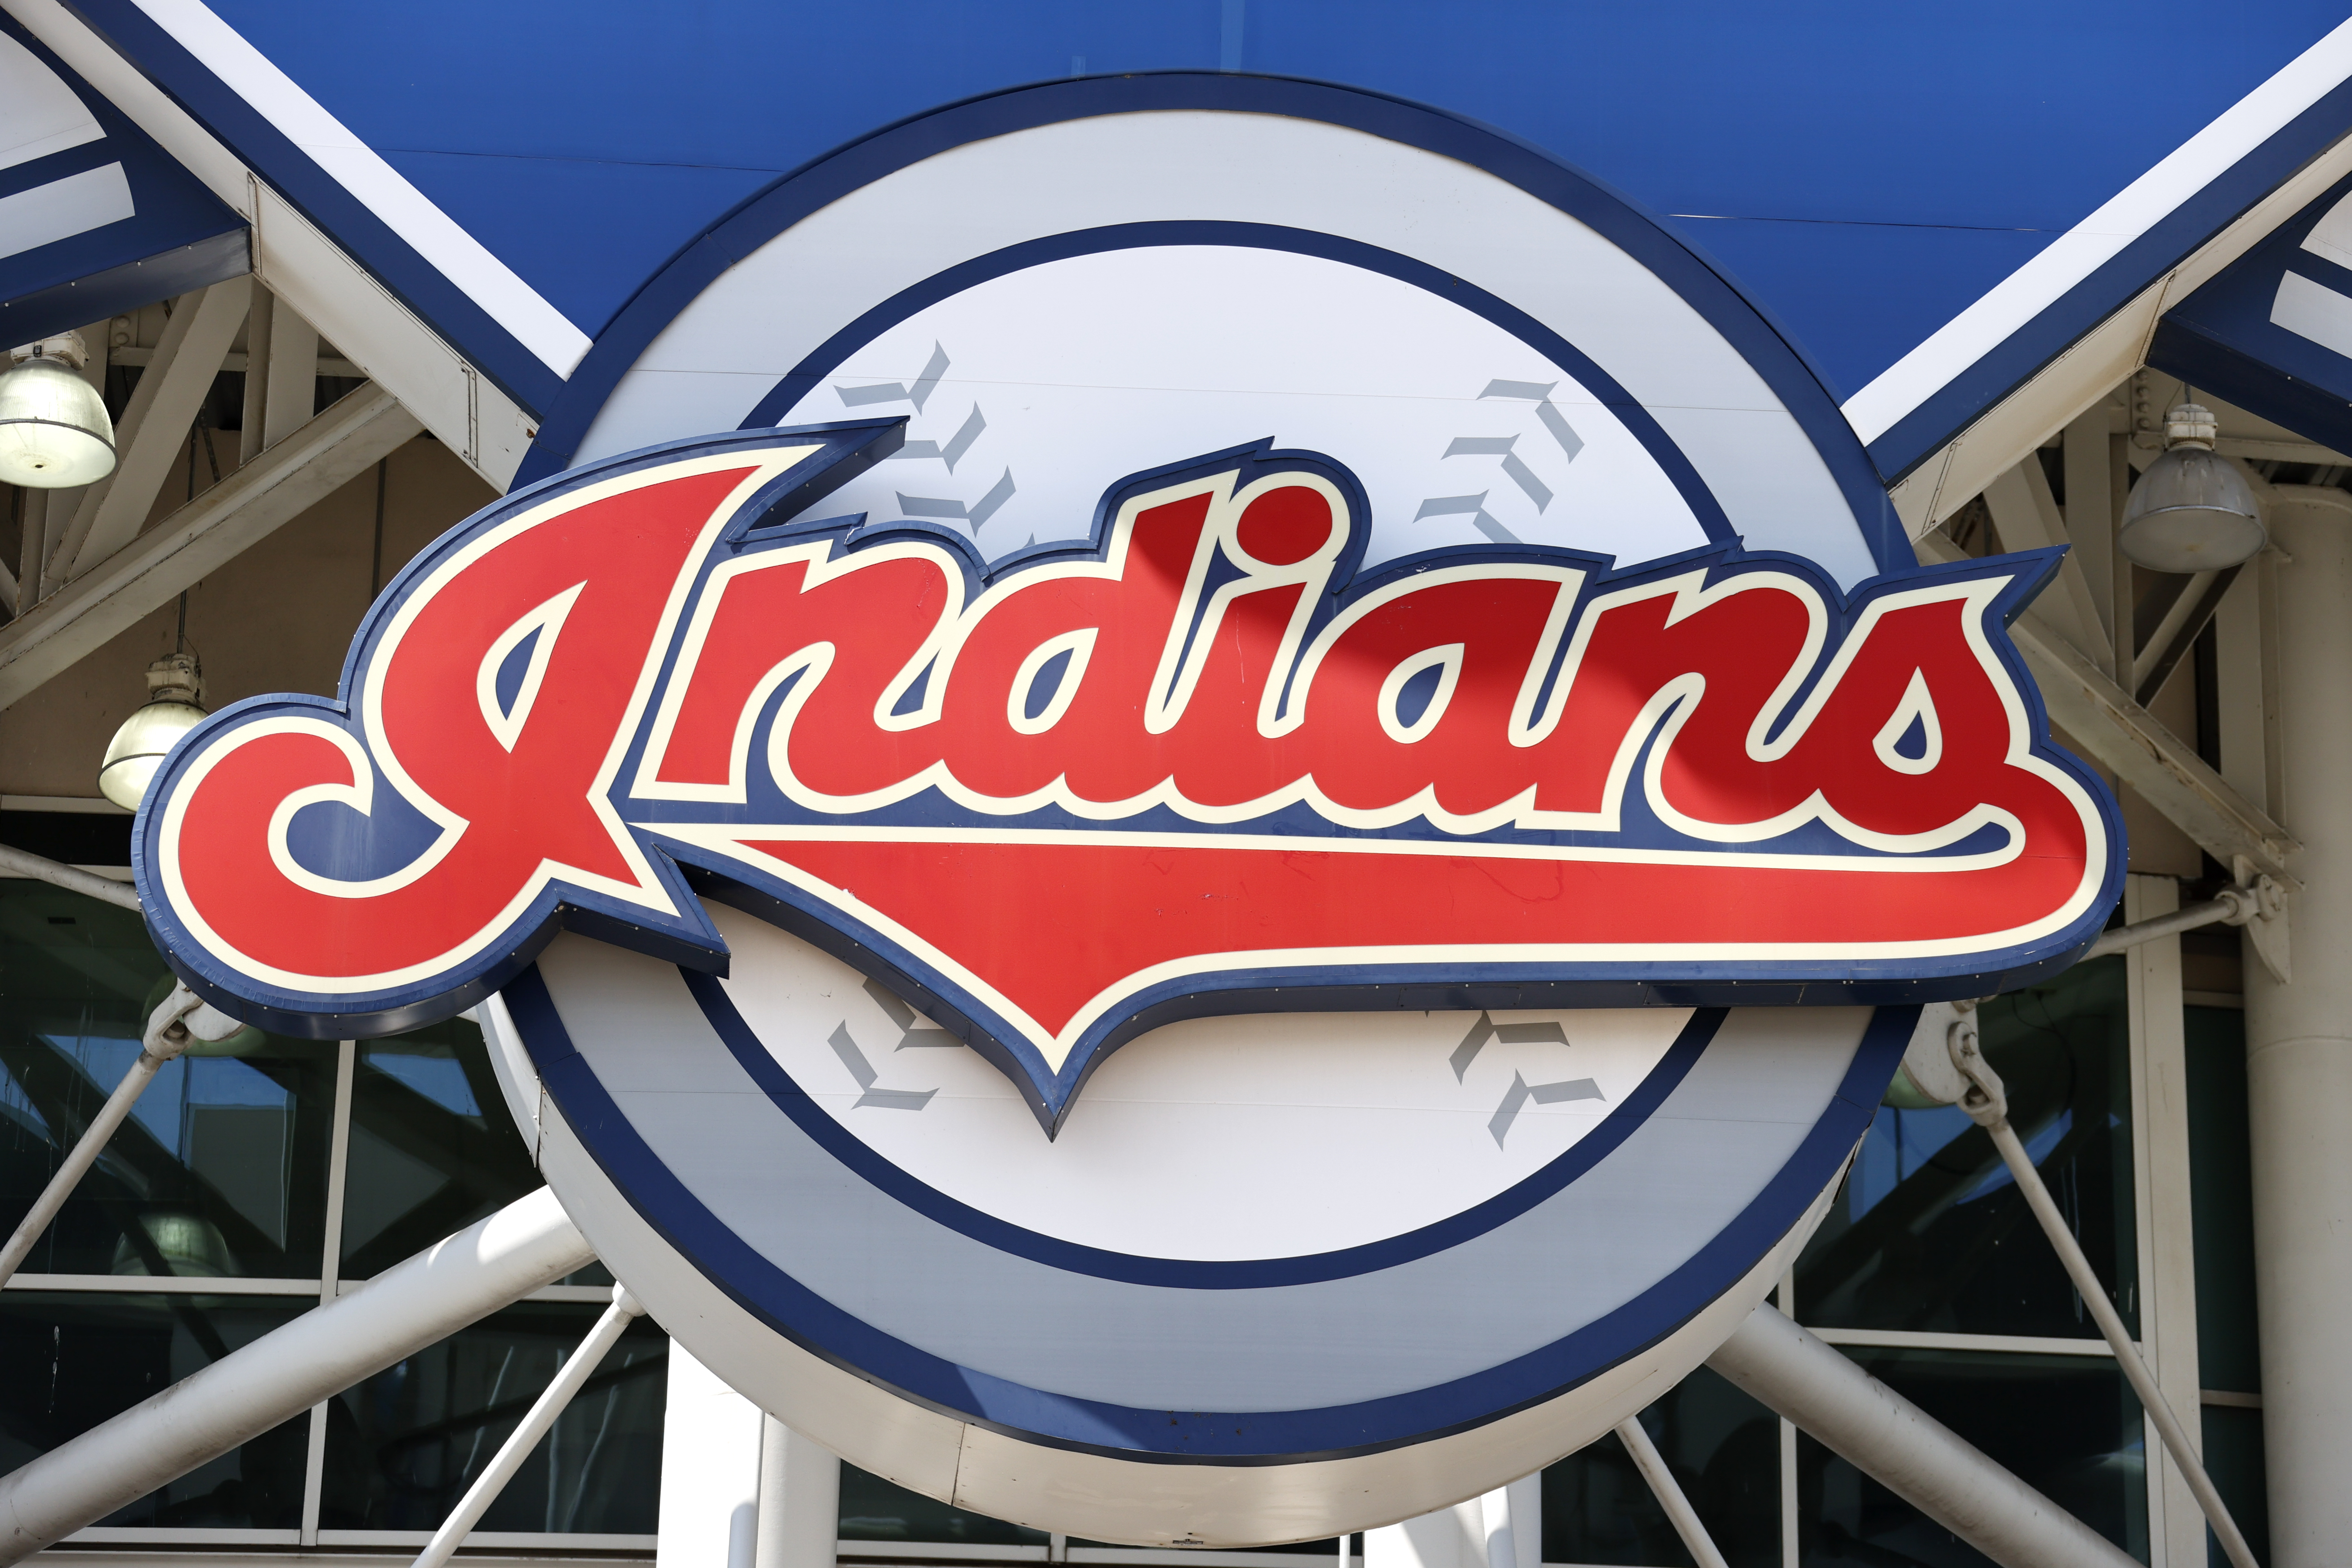 President Trump Slams Cleveland S Decision To Drop Indians Name